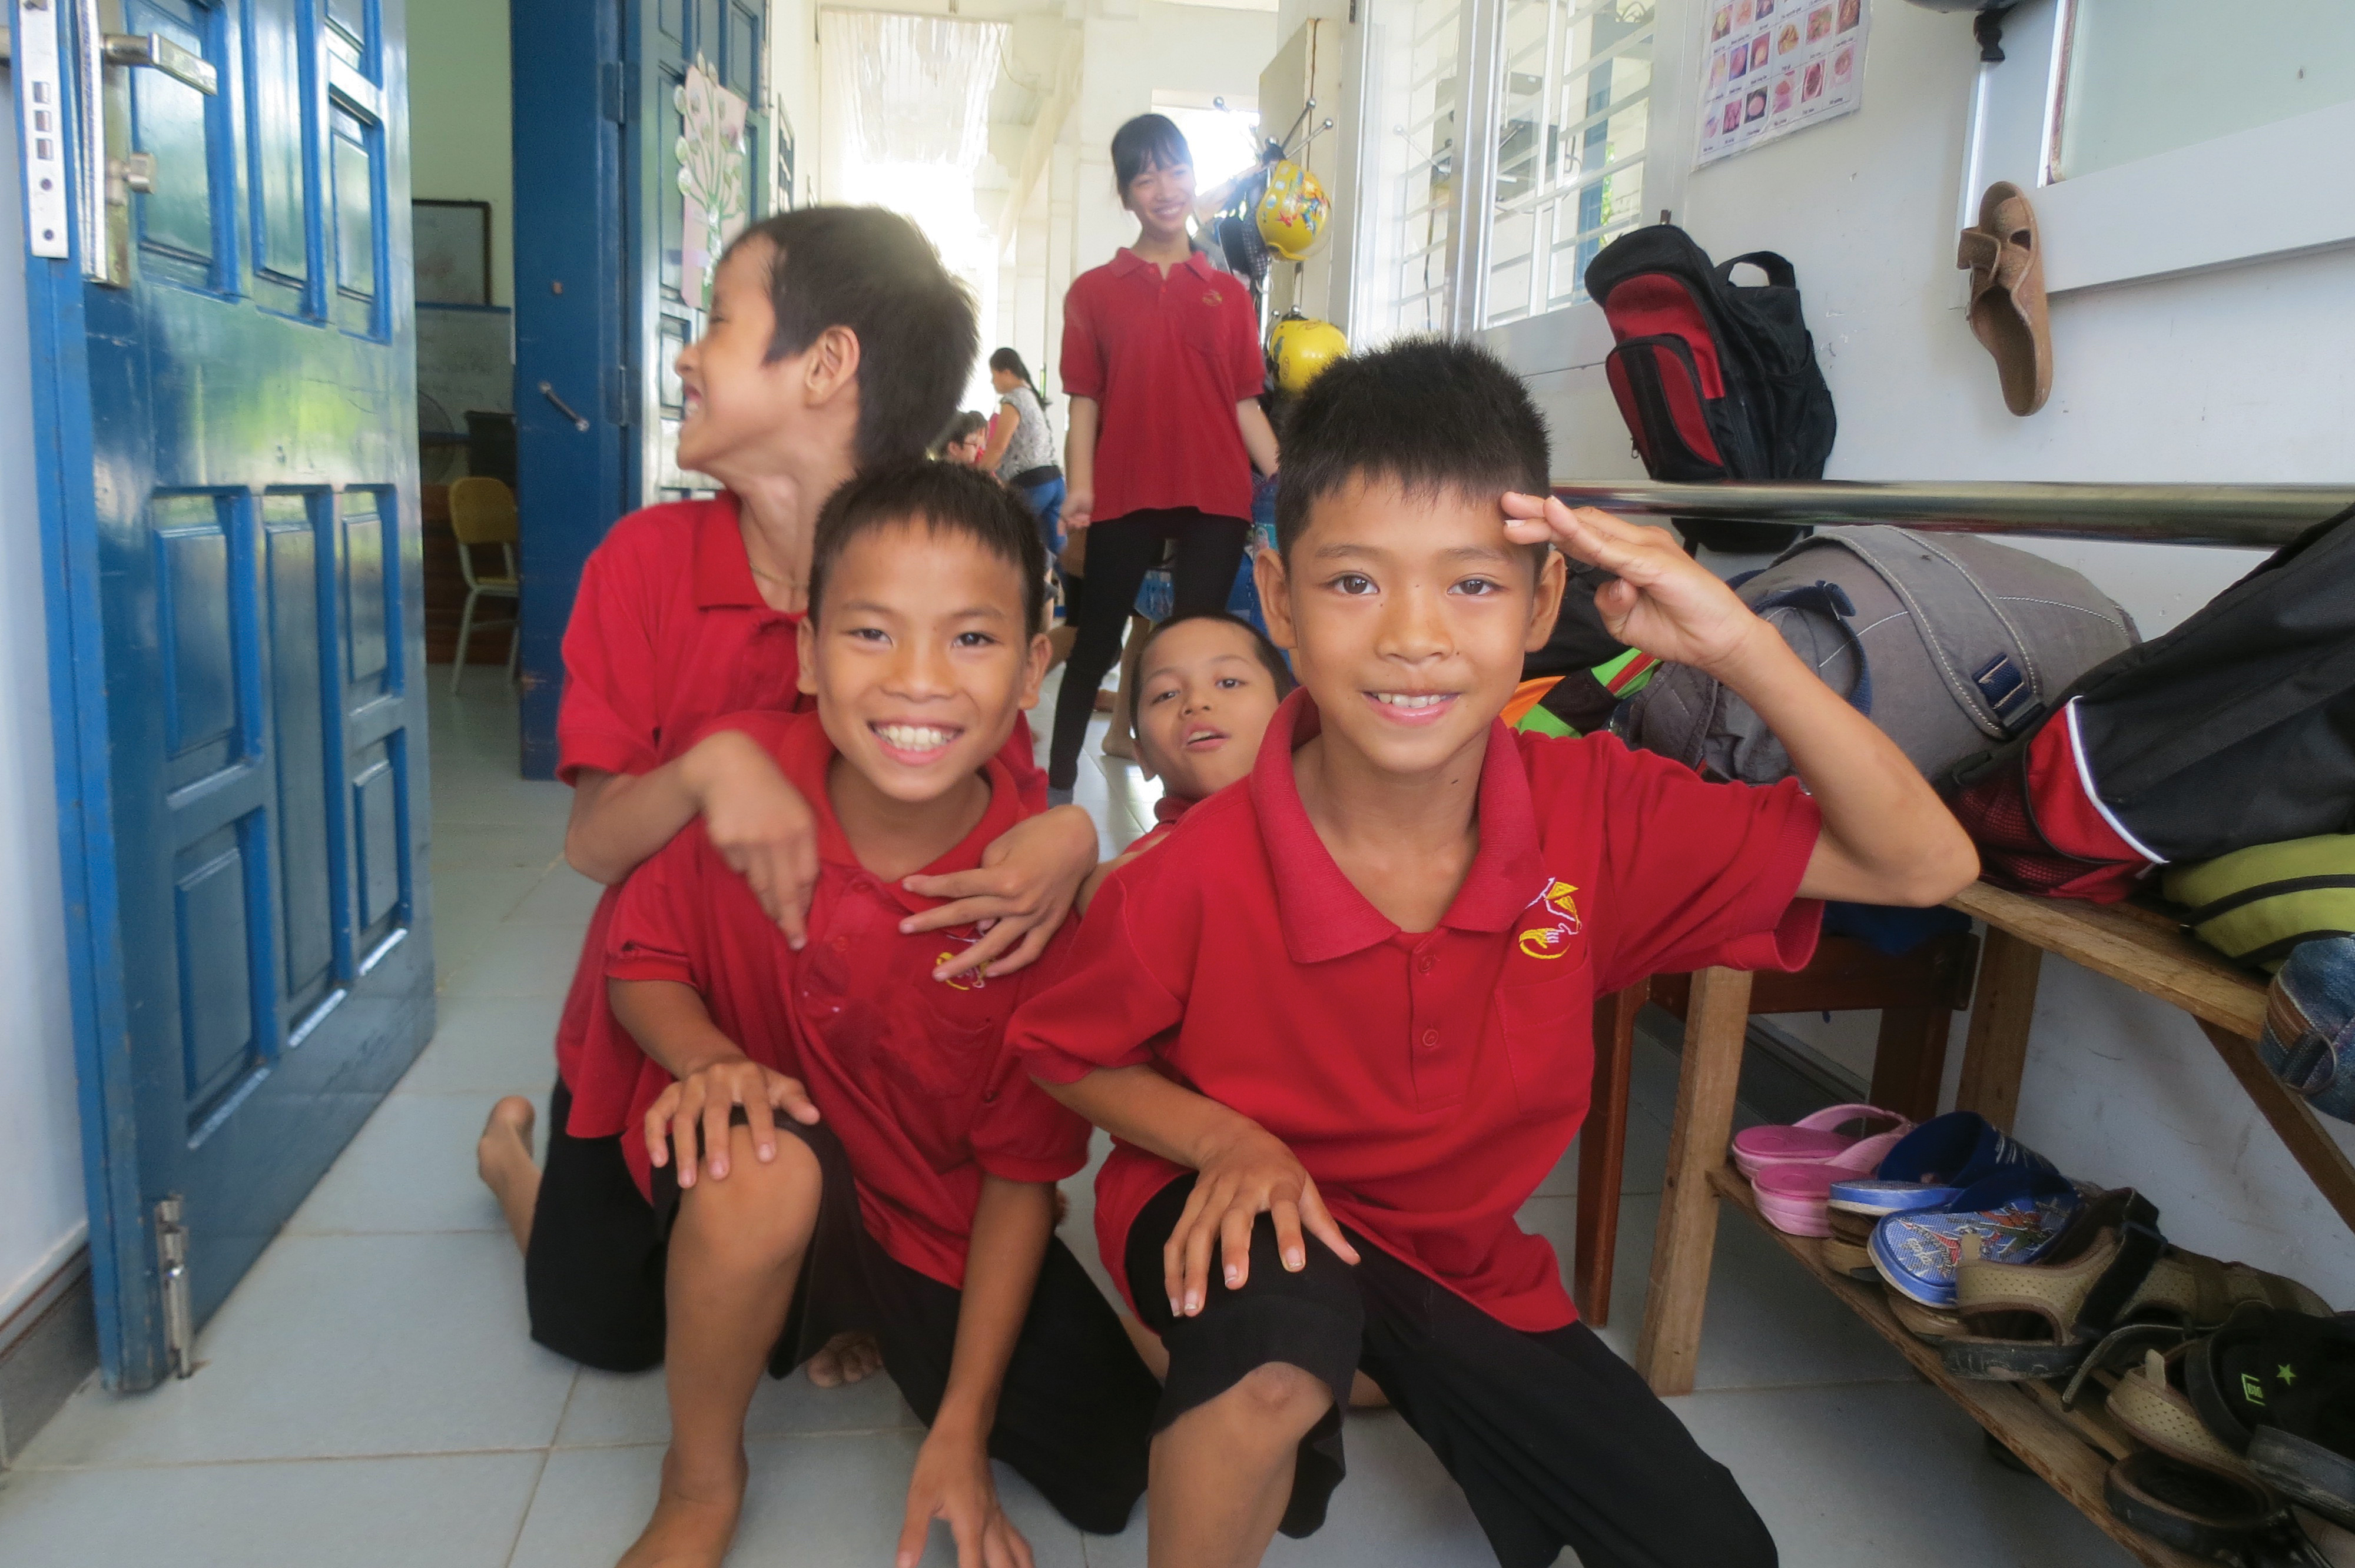 For students, making friends is an important social aspect of their education. 